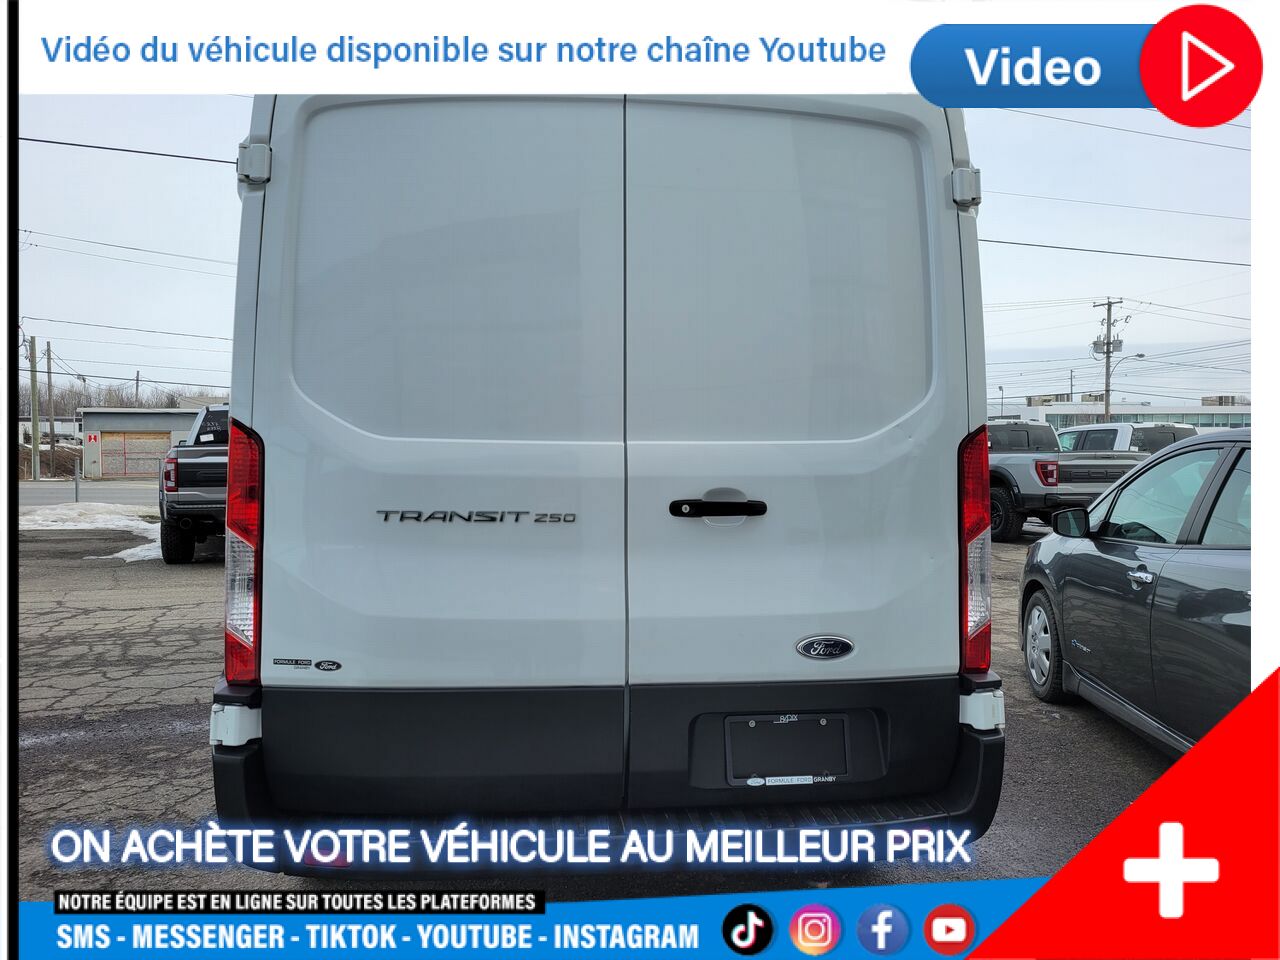 2021 Ford Transit fourgon utilitaire Granby - photo #6